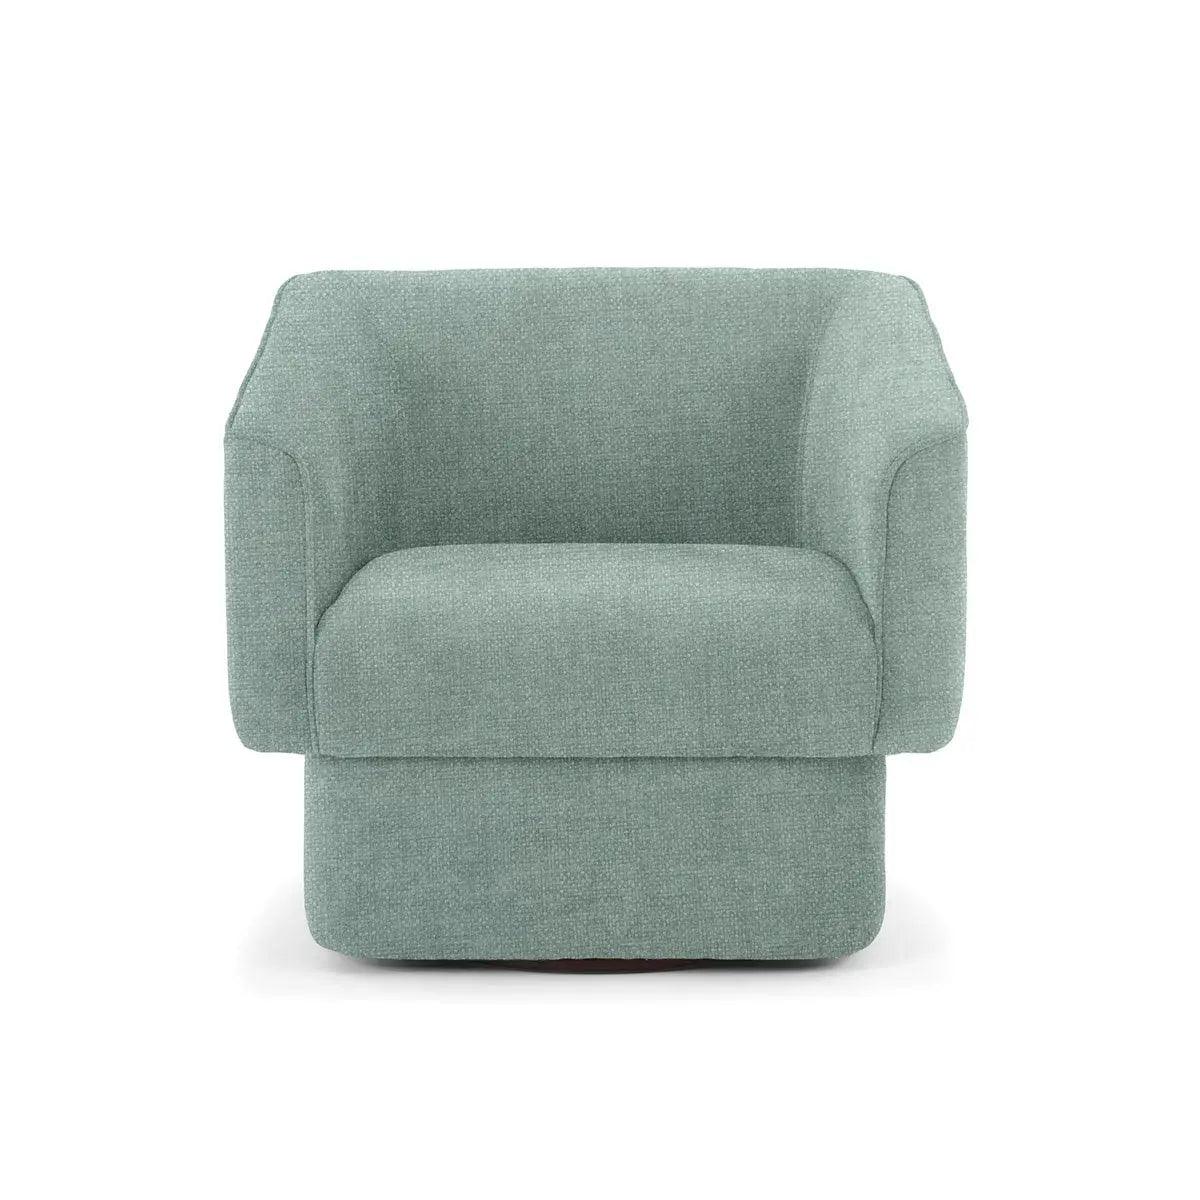 Marmont Swivel Arm Chair - Pigeon The Family Love Tree